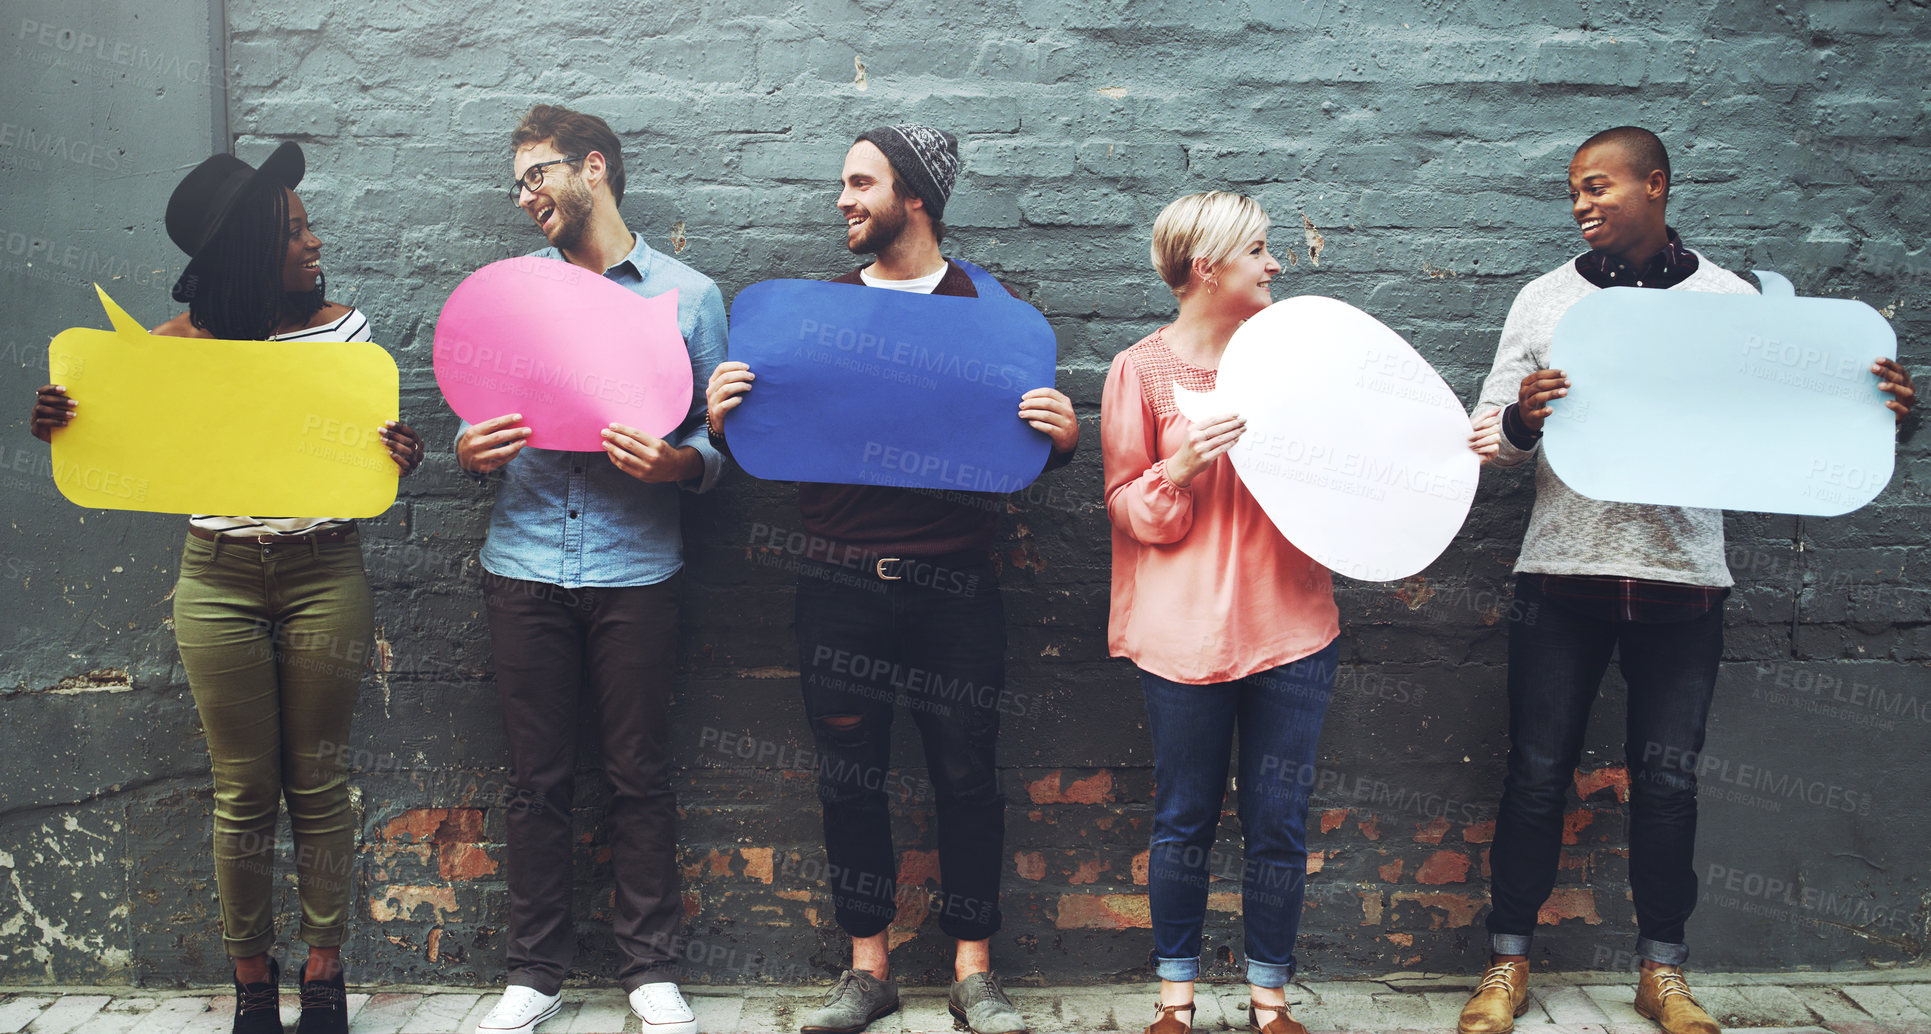 Buy stock photo Shot of a diverse group of people holding up speech bubbles against a gray brick wall